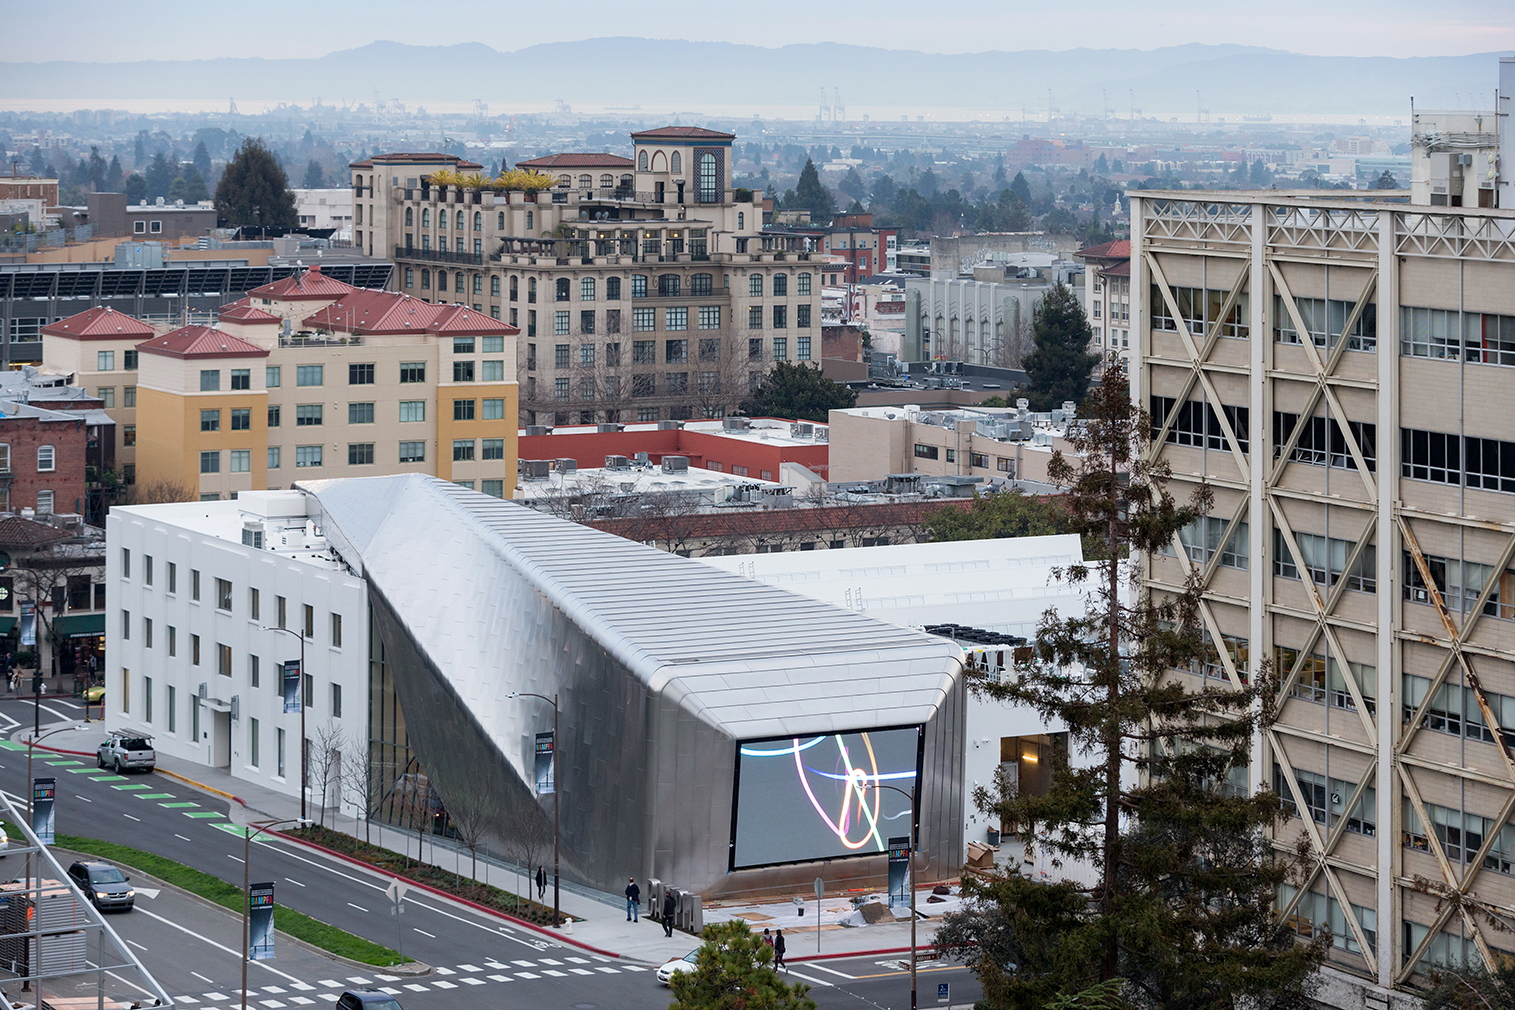 Photography: Iwan Baan Courtesy of Diller Scofidio + Renfro, EHDD, and the Berkeley Art Museum and Pacific Film Archive